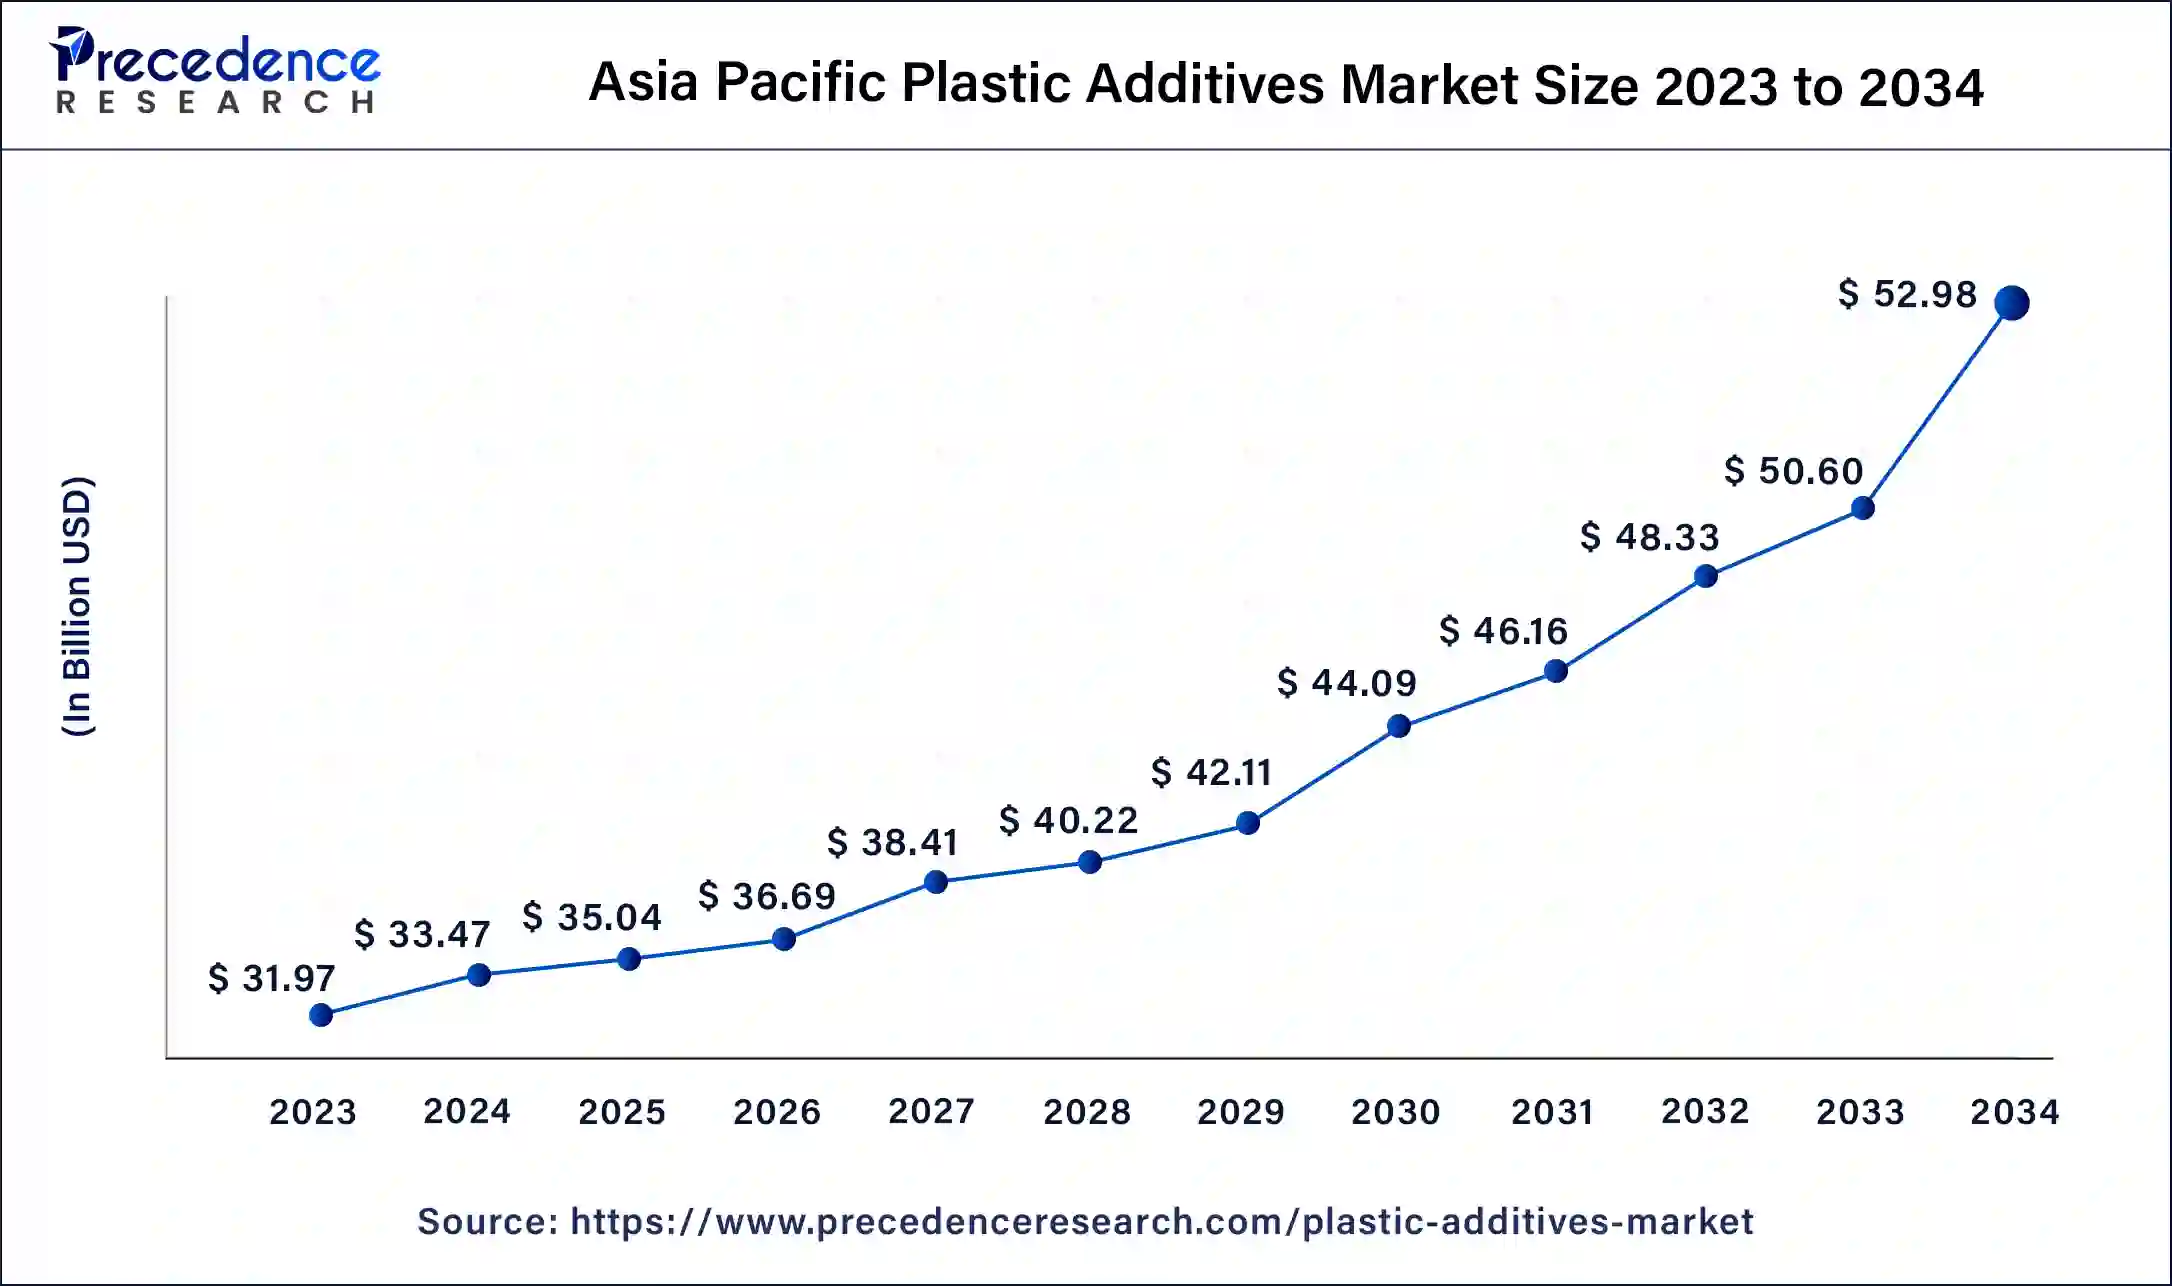 Asia Pacific Plastic Additives Market Size 2024 to 2034